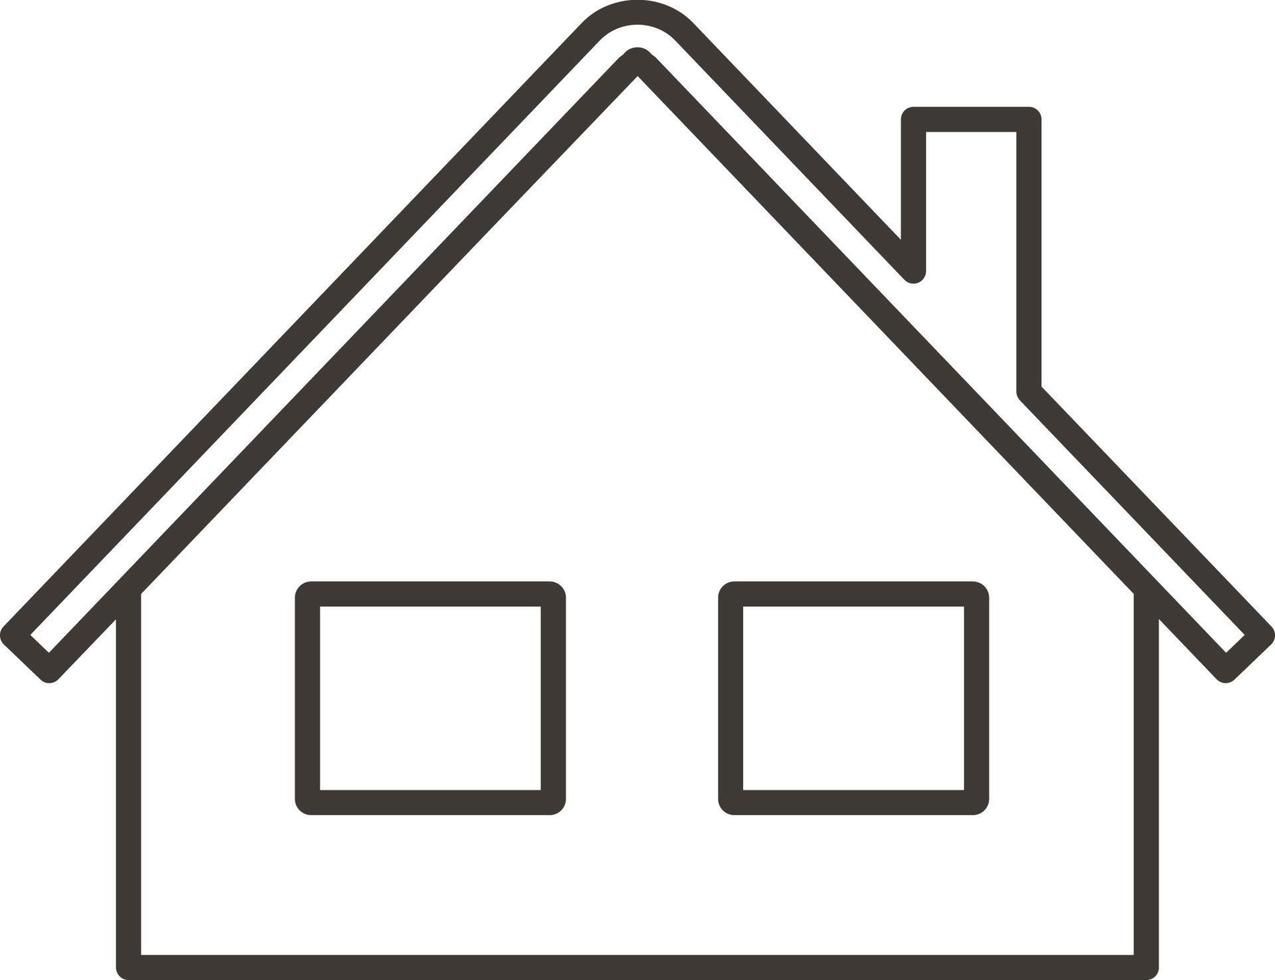 Building, home, outline, icon - Building vector icon on white background